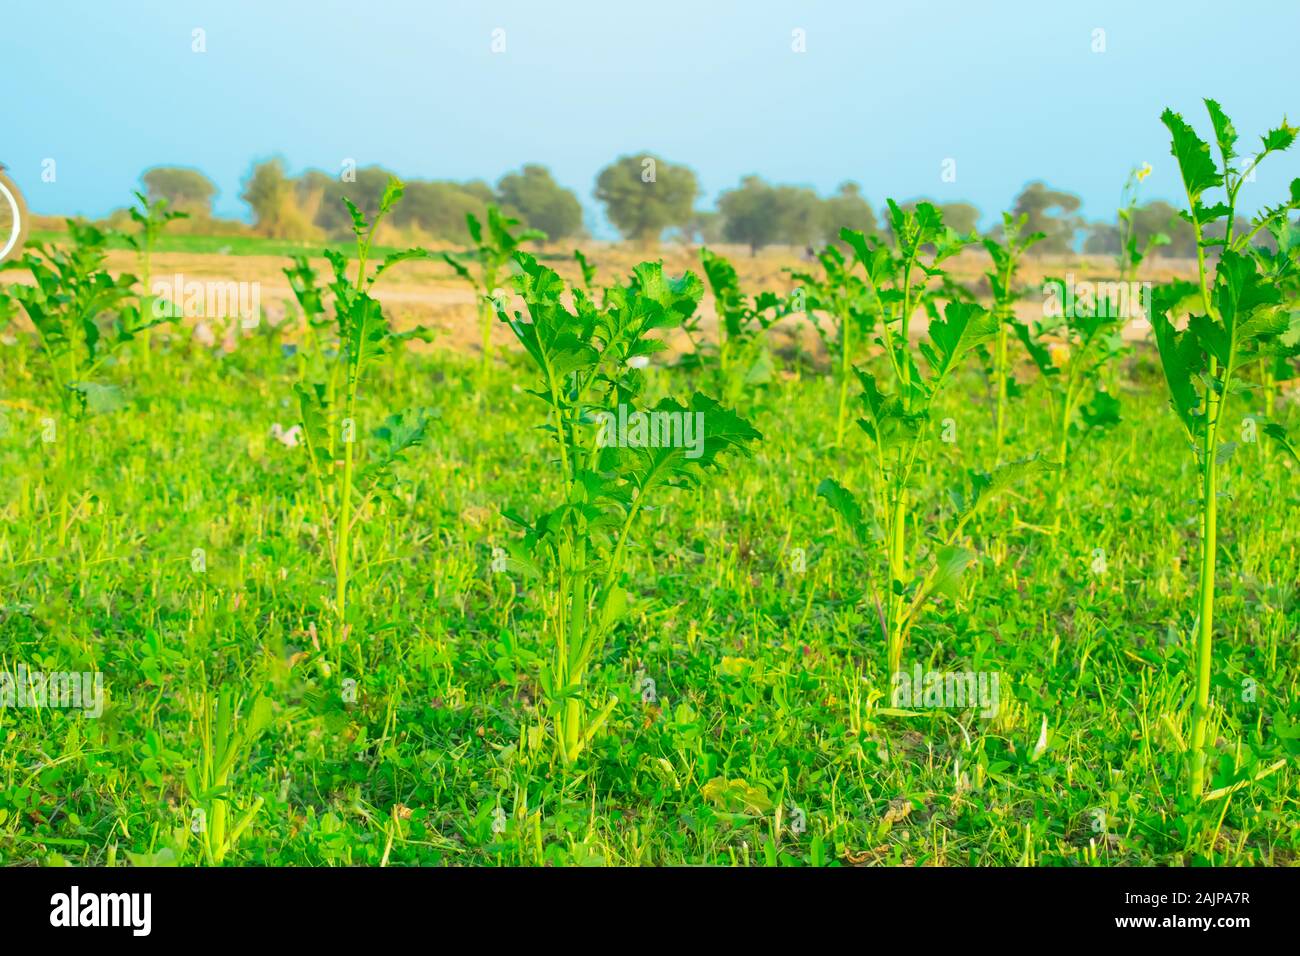 Beautiful mustered plants with their colourful leaves in a field,punjab,pakistan. Stock Photo